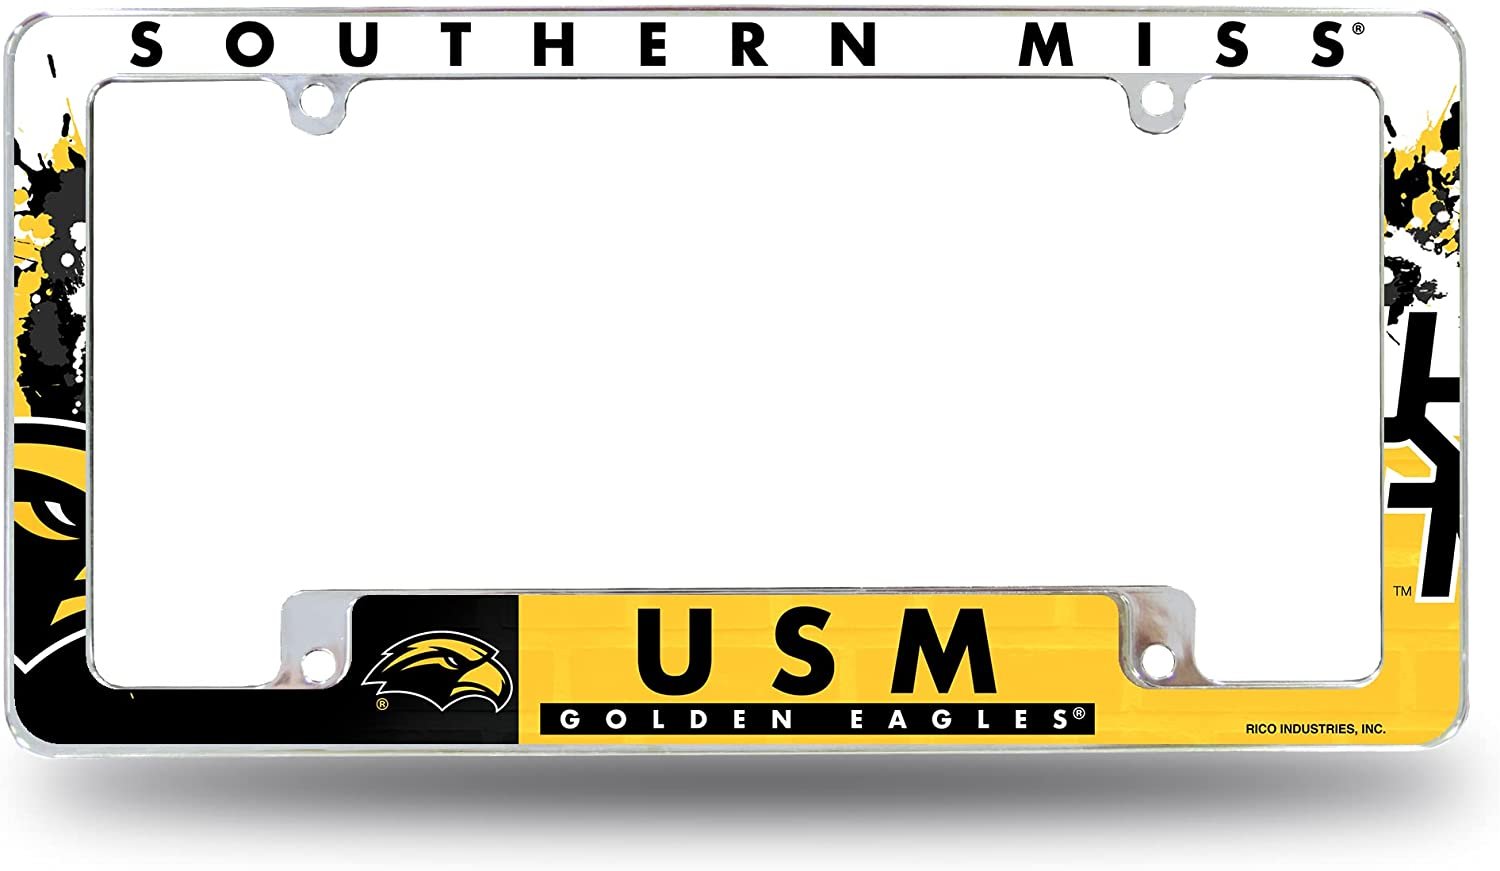 University of Southern Mississippi Golden Eagles Metal License Plate Frame Tag Cover All Over Design 12x6 Inch